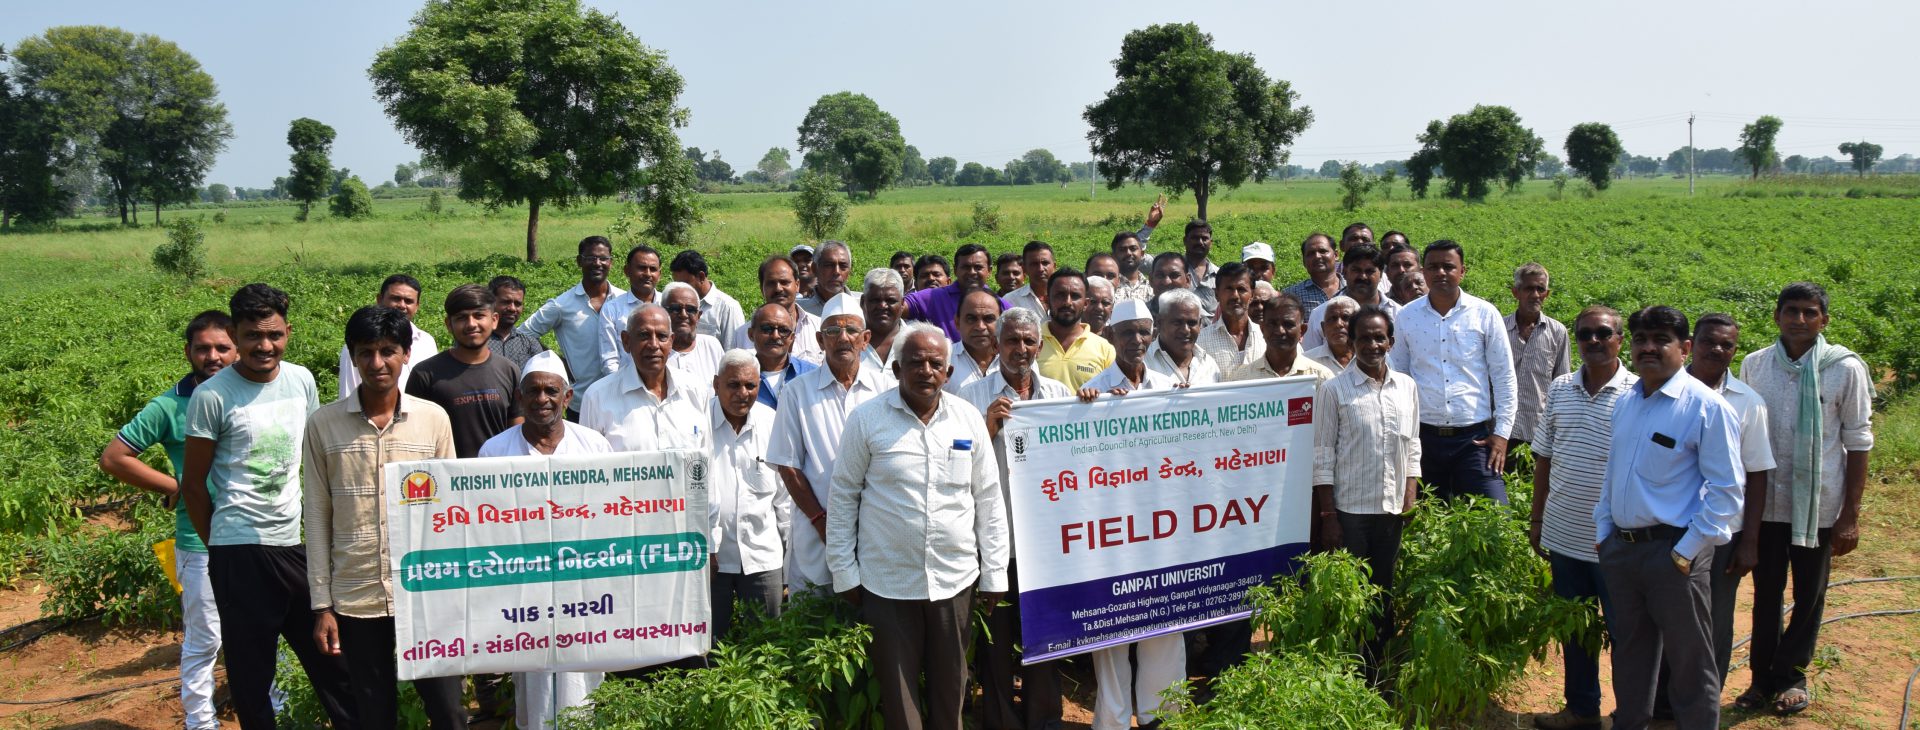 We provide Training to Farmers